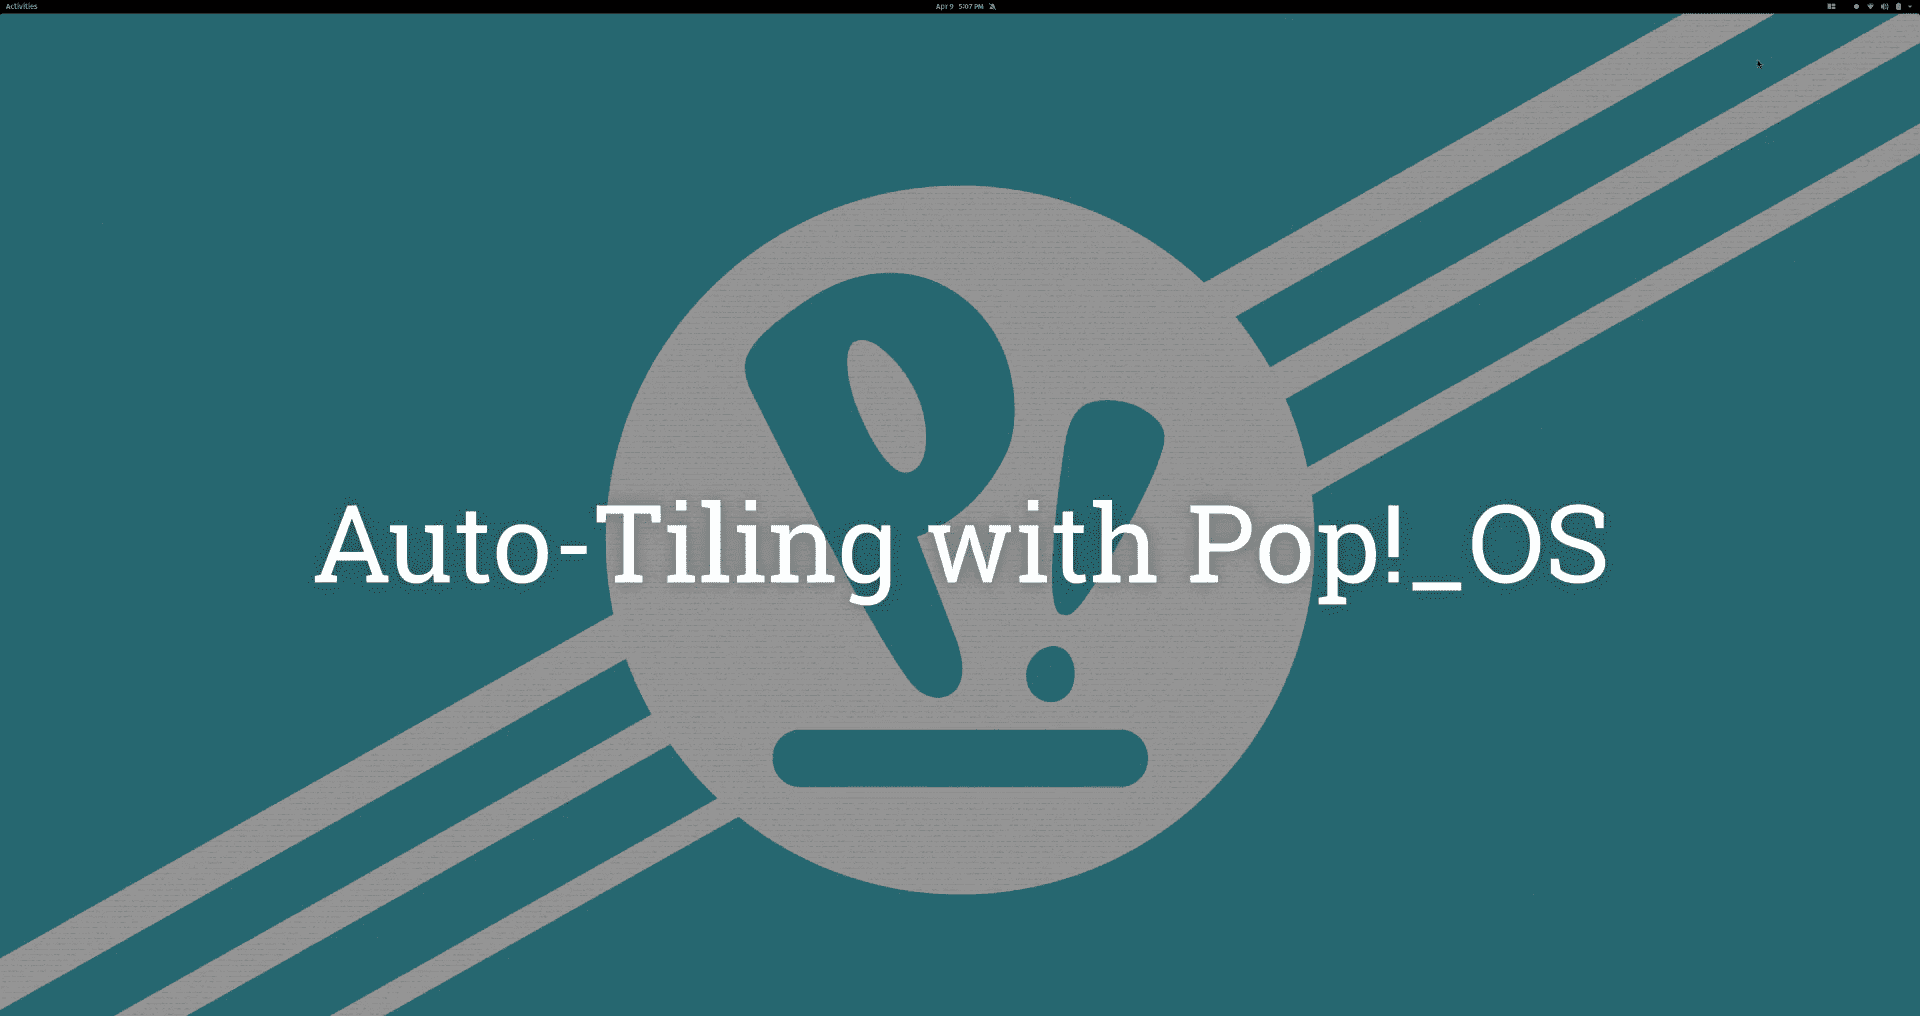 Auto Tiling with Pop!_OS